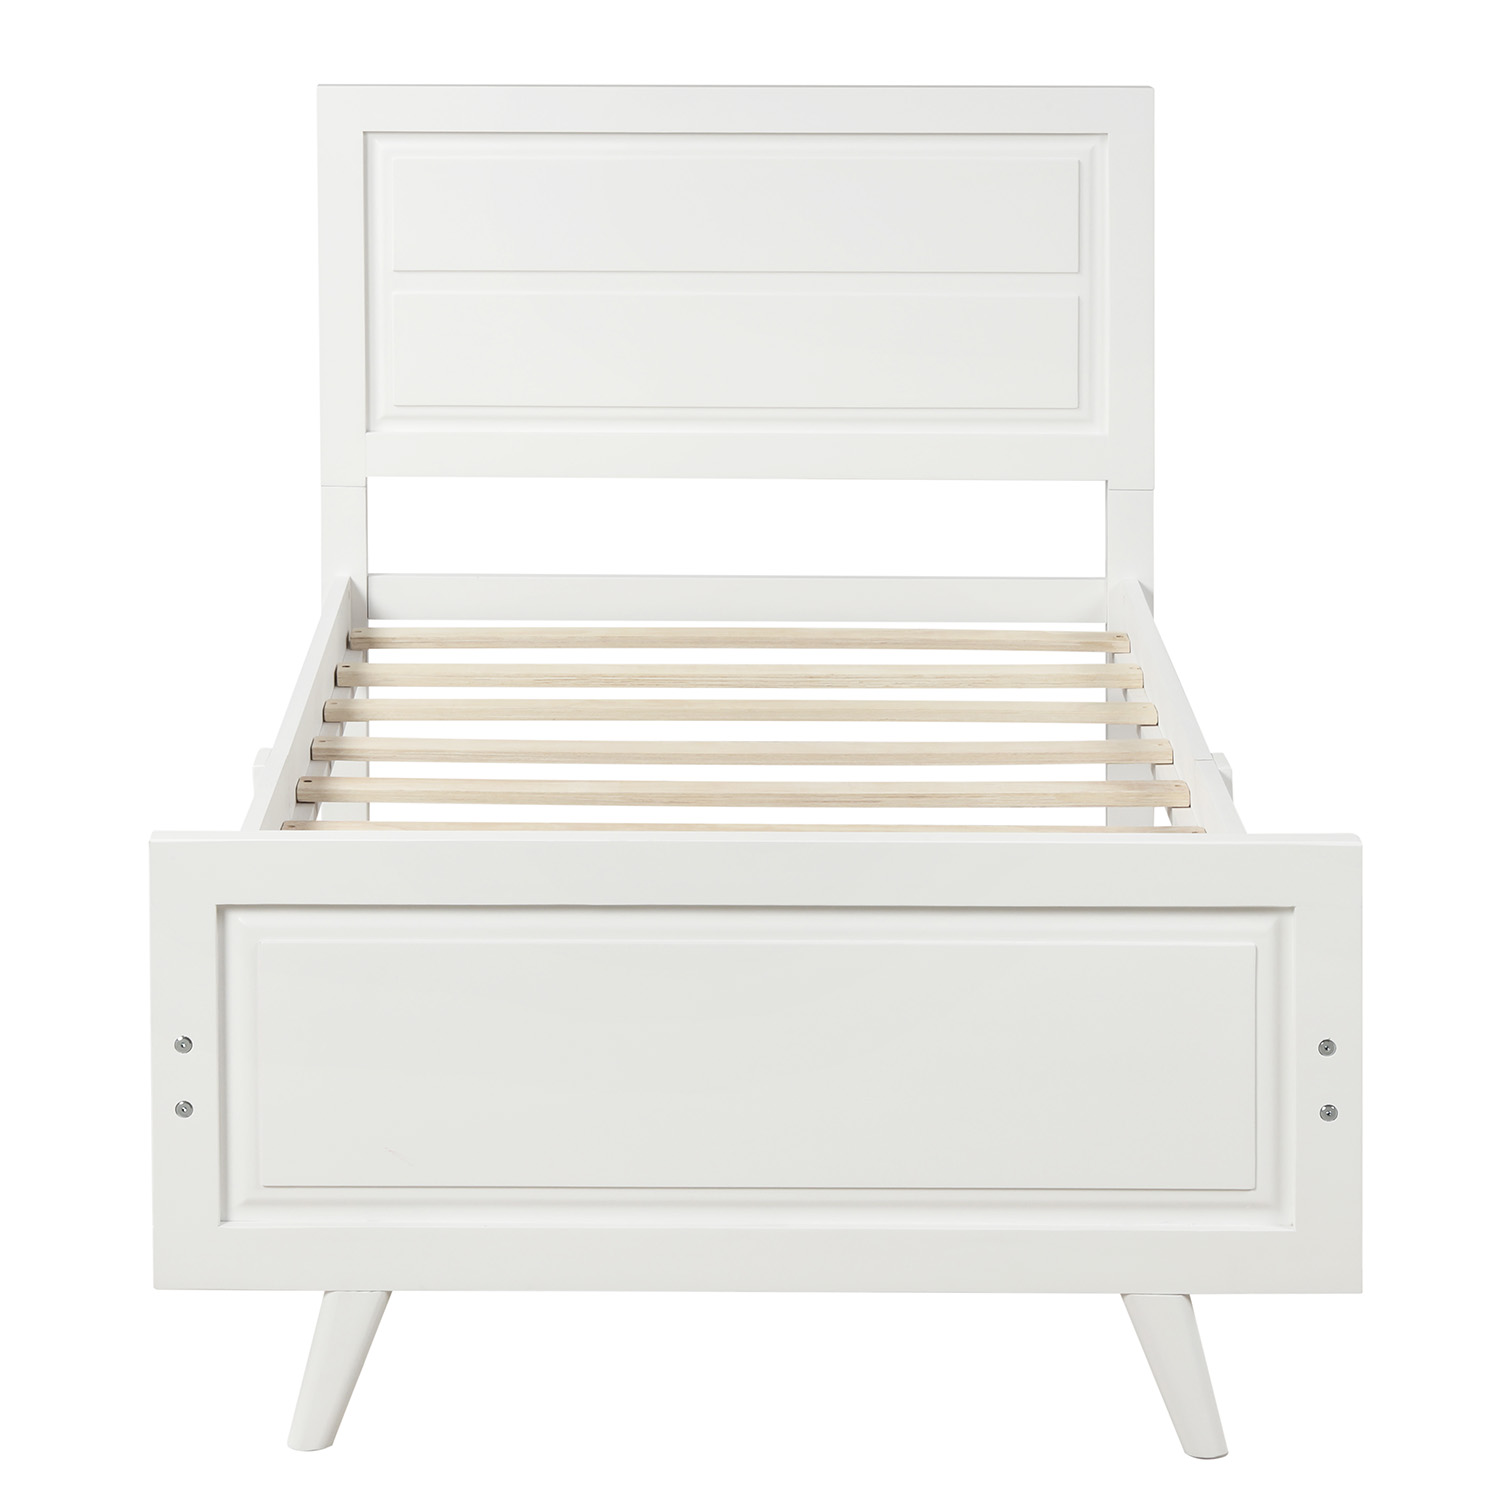 Twin Bed Frame with Headboard, Wood Single Bed Frame Wood Platform Bed, Twin Single Bed Frame w/ Wood Slat, Twin Platform Bed Frame for Kids, Platform Twin Bed Frame No Box Spring Needed, White, R108 - image 3 of 6